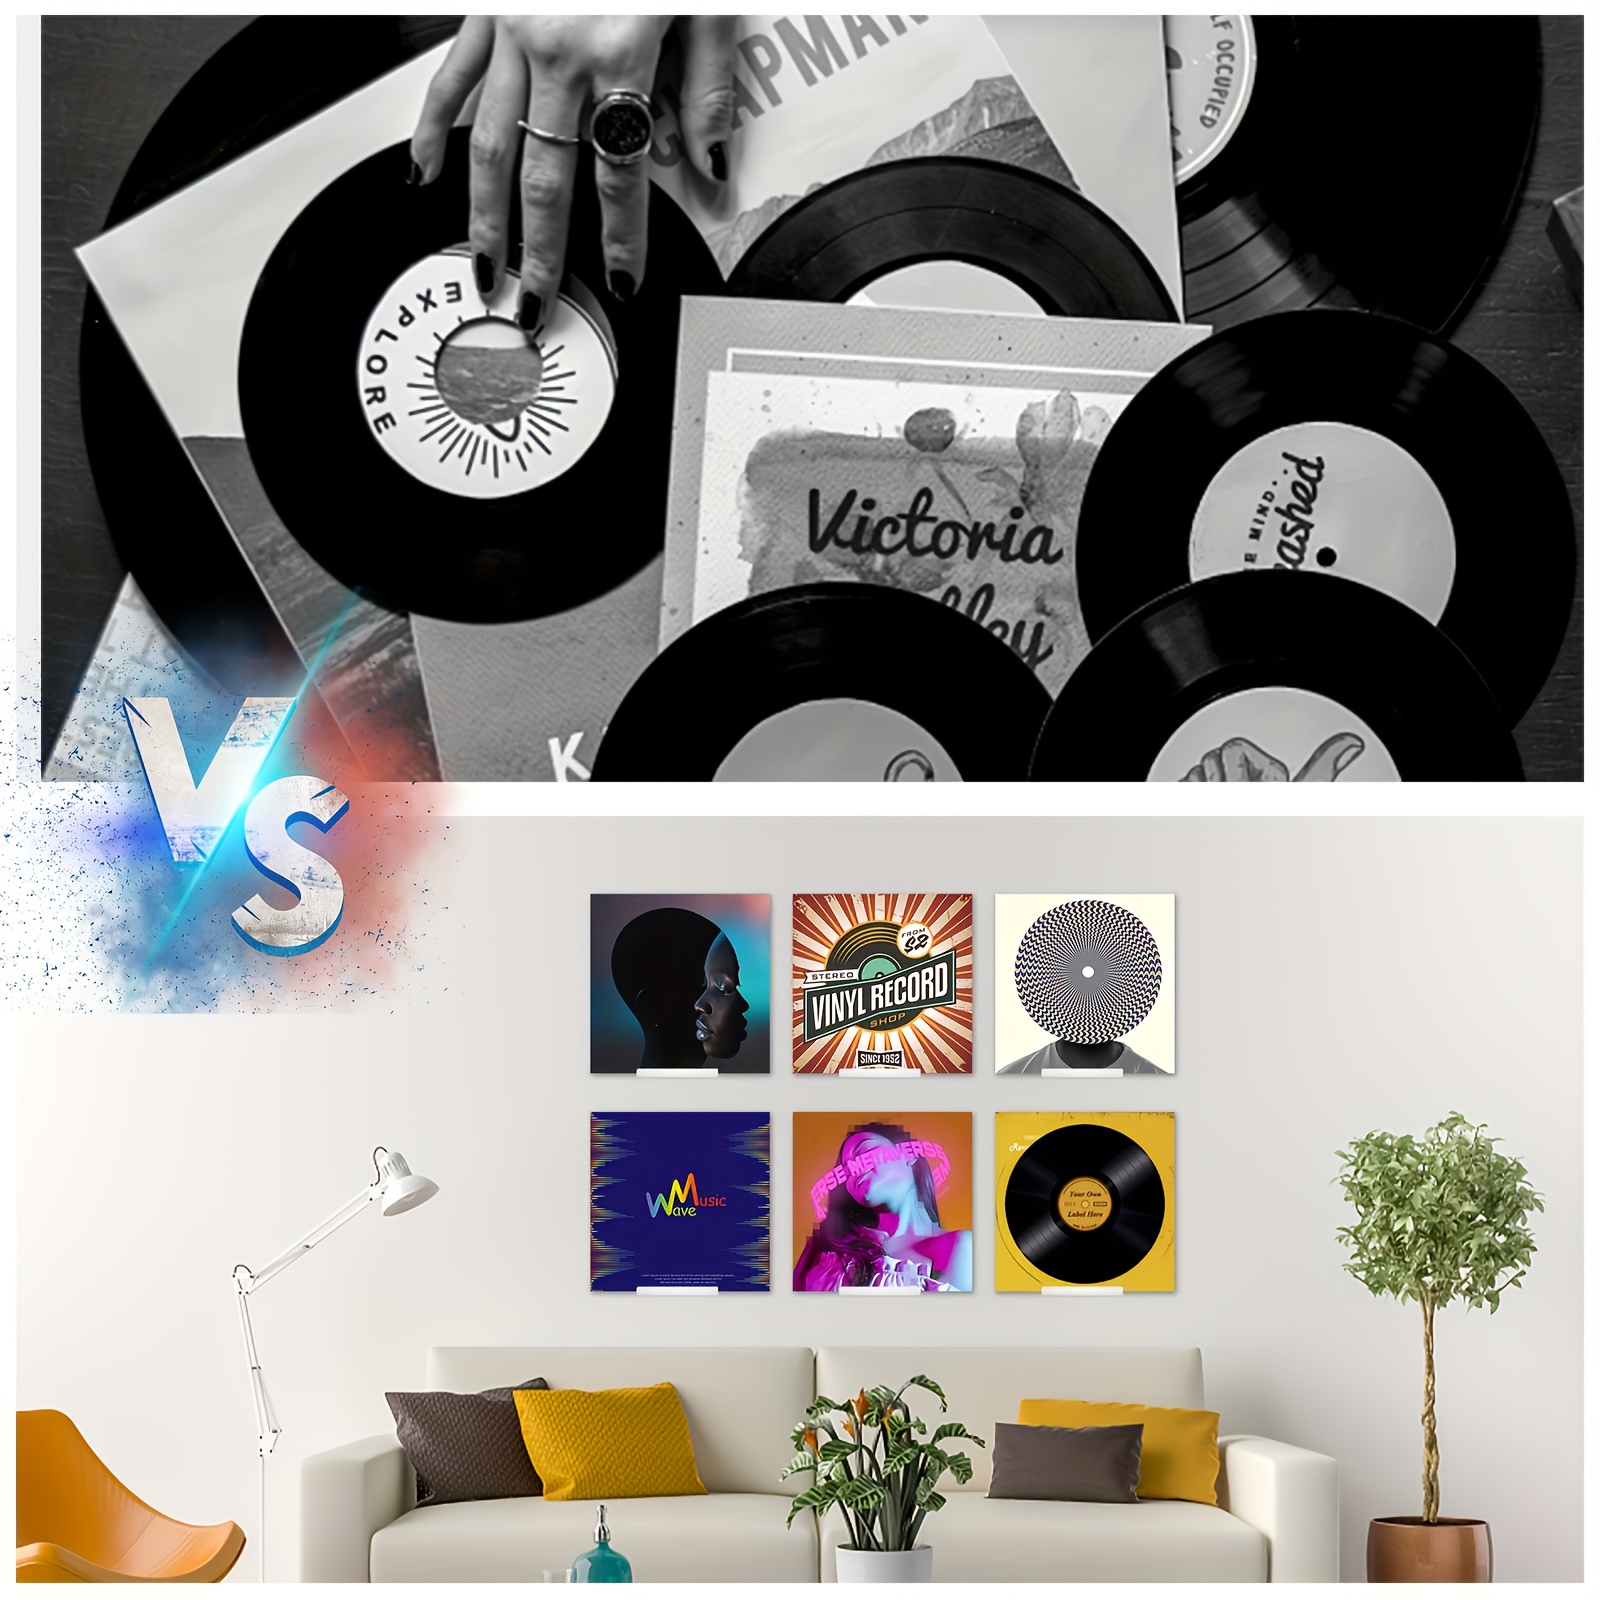 1pc, Wall Mounted Acrylic Record Storage Holder - Elegant Vinyl Record  Display Stand for LP Records and Floating Shelves - Organize and Showcase  Your